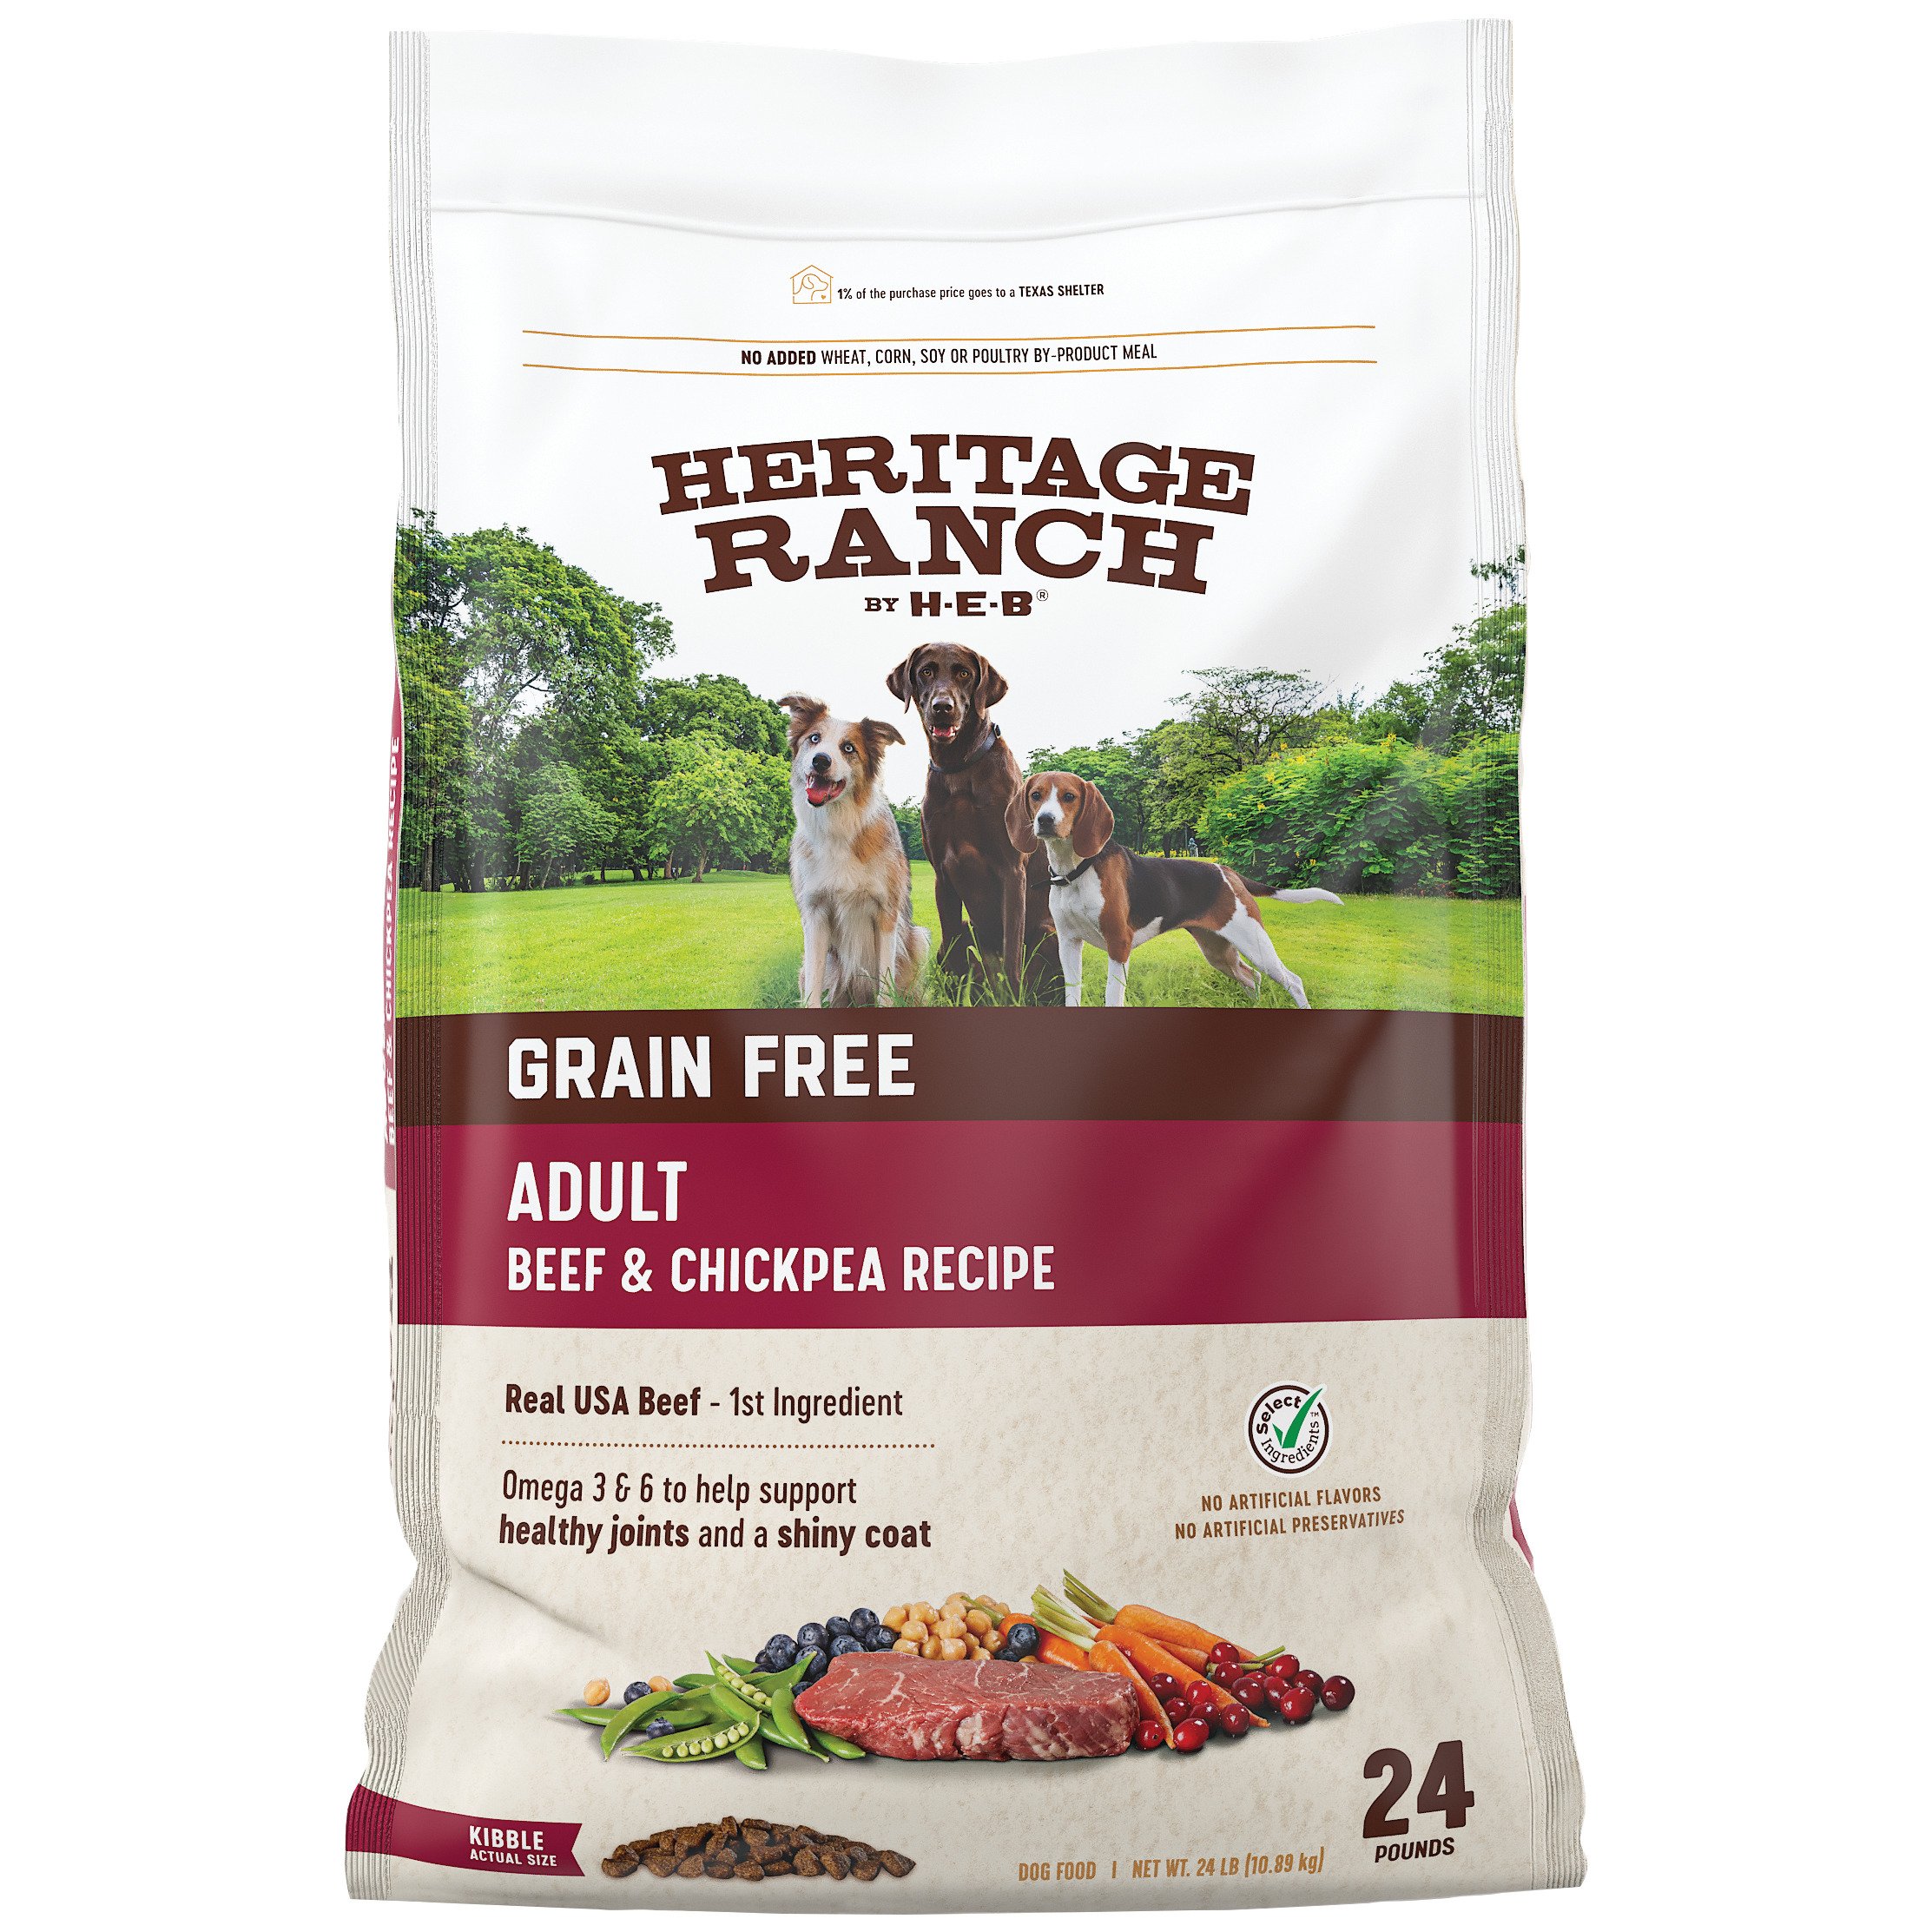 Heritage Ranch by HEB Grain Free Beef & Chickpea Recipe Dry Dog Food